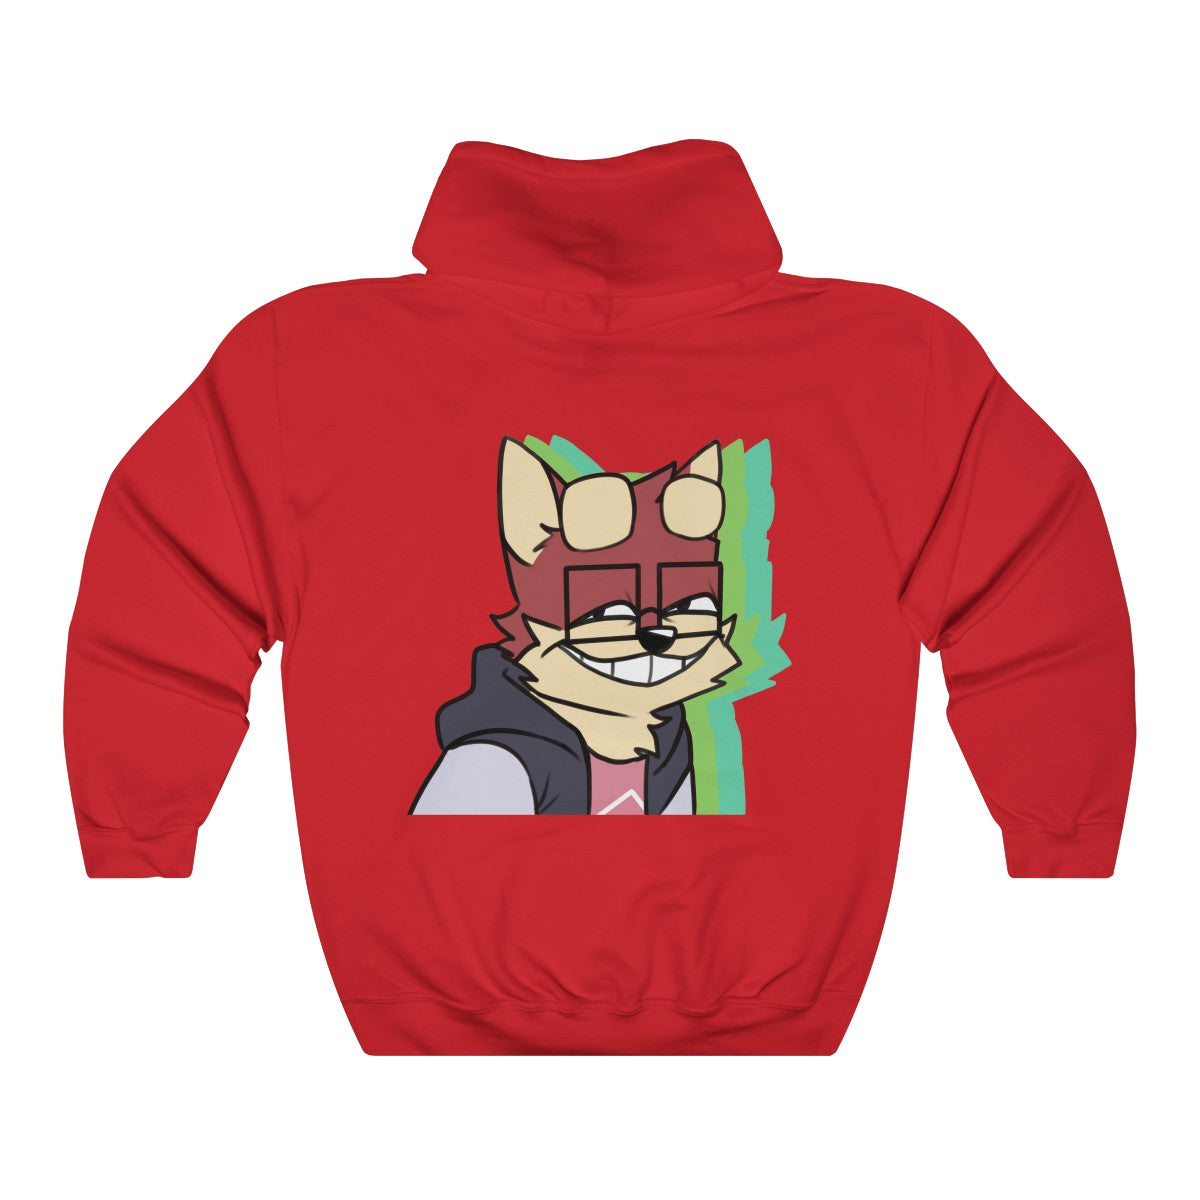 Thinking About You - Hoodie Hoodie Ooka Red S 